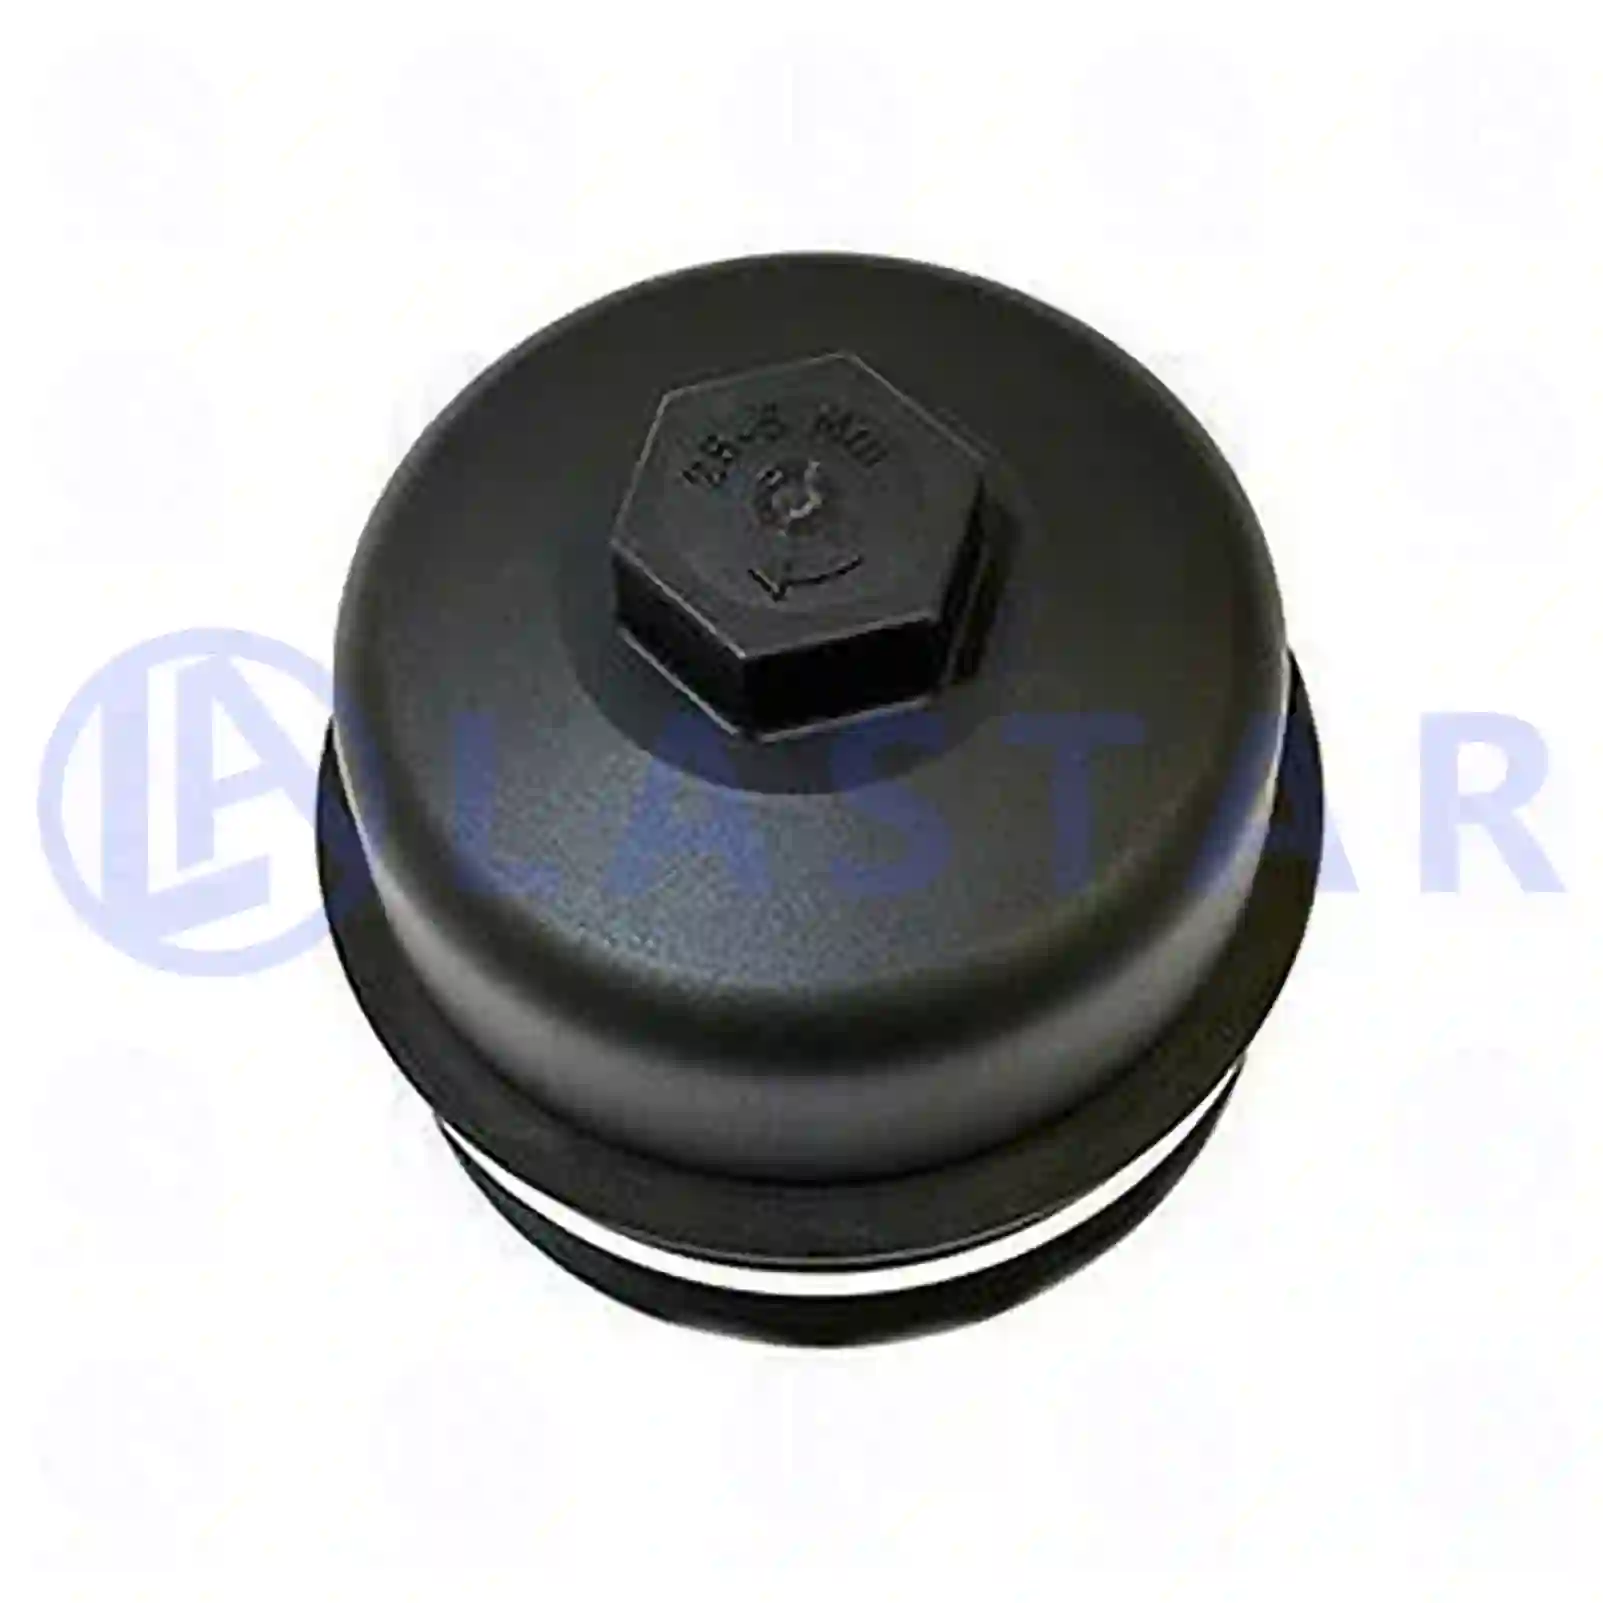 Oil filter cover, with o-ring, 77704748, 1742035 ||  77704748 Lastar Spare Part | Truck Spare Parts, Auotomotive Spare Parts Oil filter cover, with o-ring, 77704748, 1742035 ||  77704748 Lastar Spare Part | Truck Spare Parts, Auotomotive Spare Parts